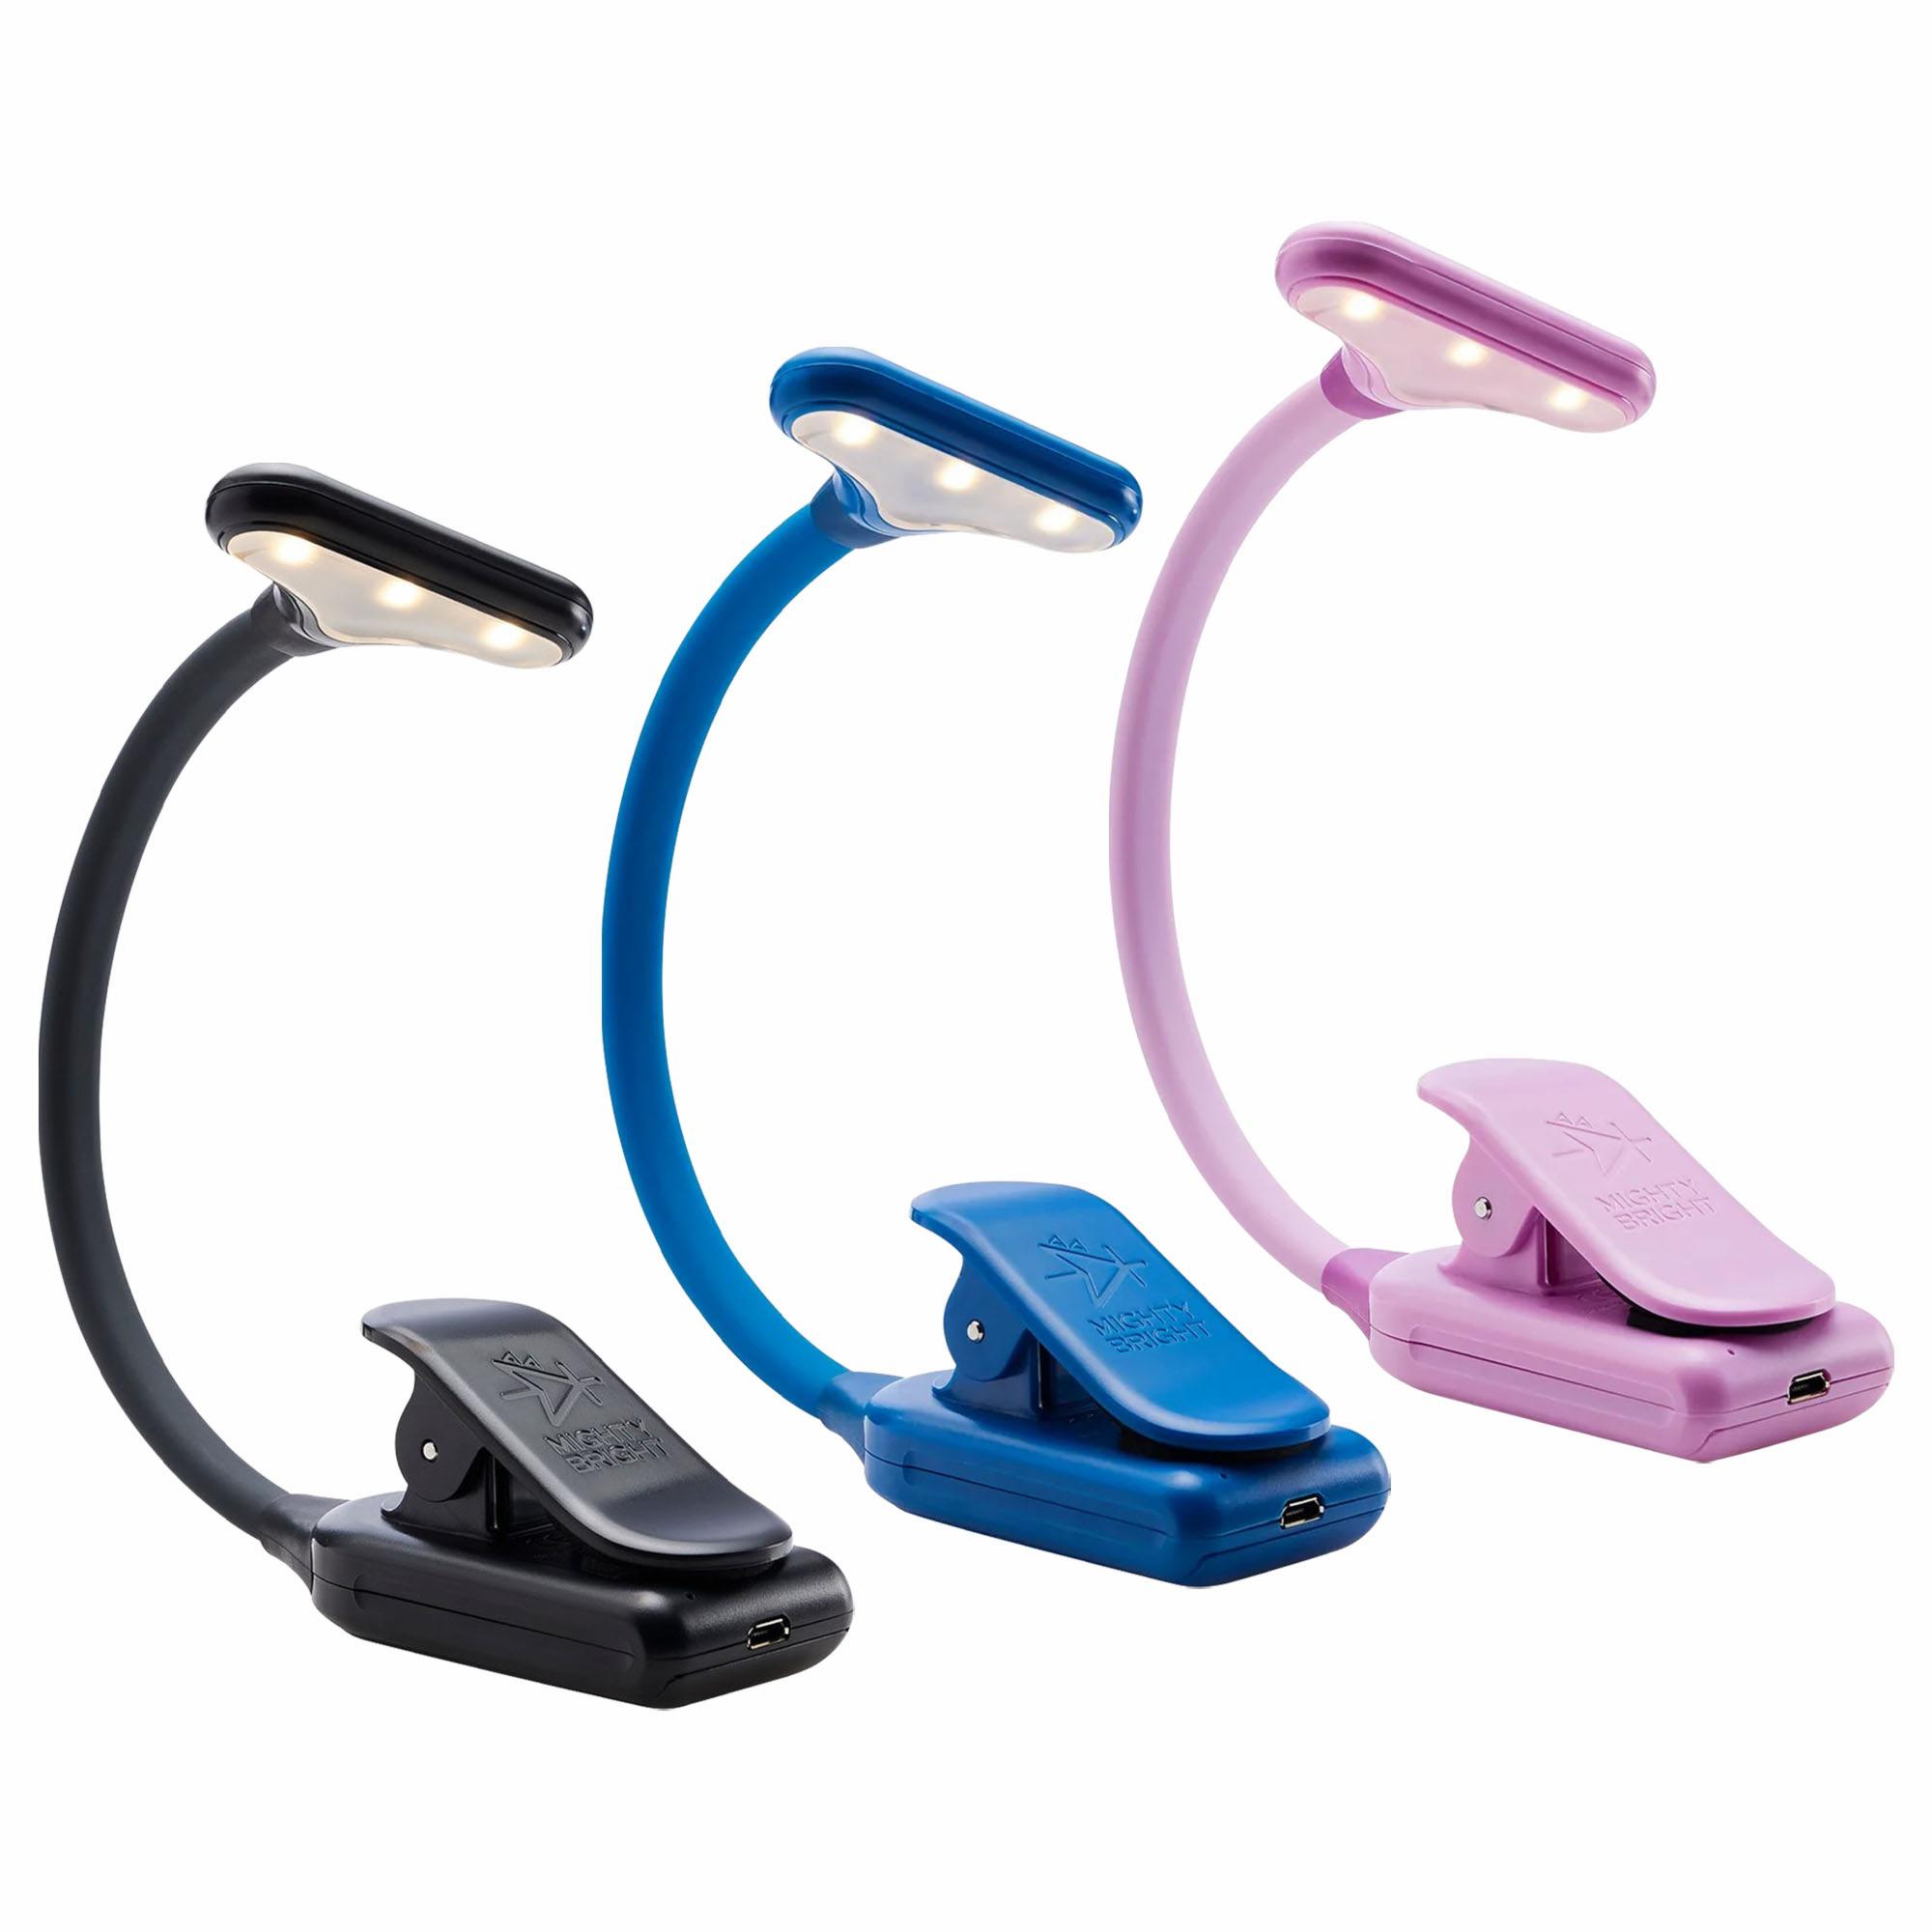 Mighty Bright NuFlex Rechargeable Stand Light